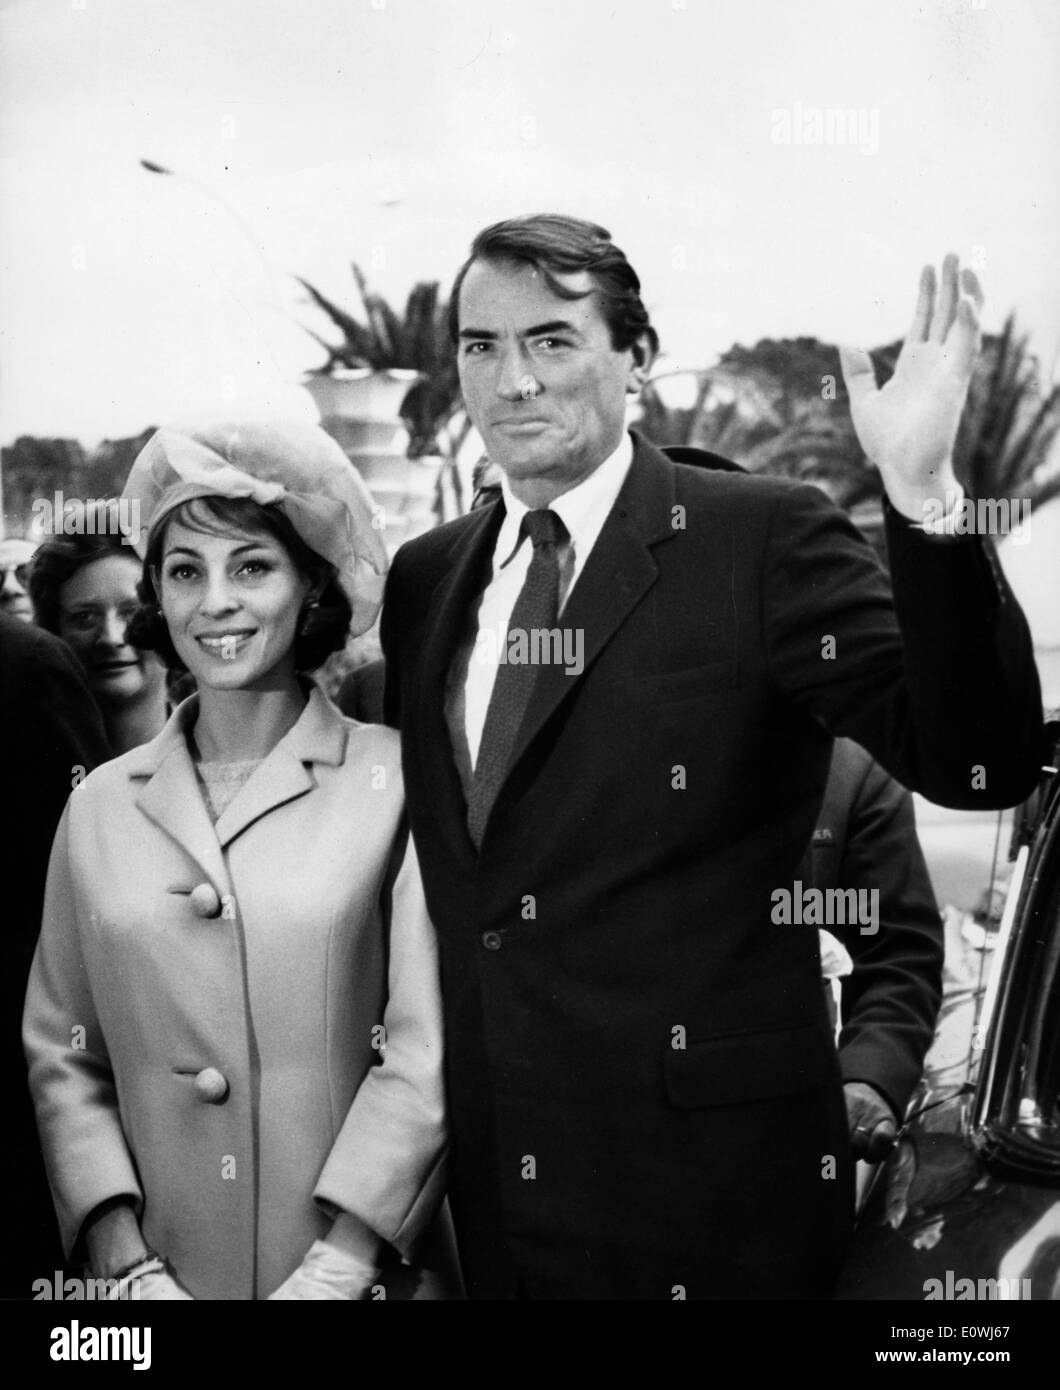 Actor Gregory Peck arriving at the Cannes Film Festival with his wife Veronique Stock Photo